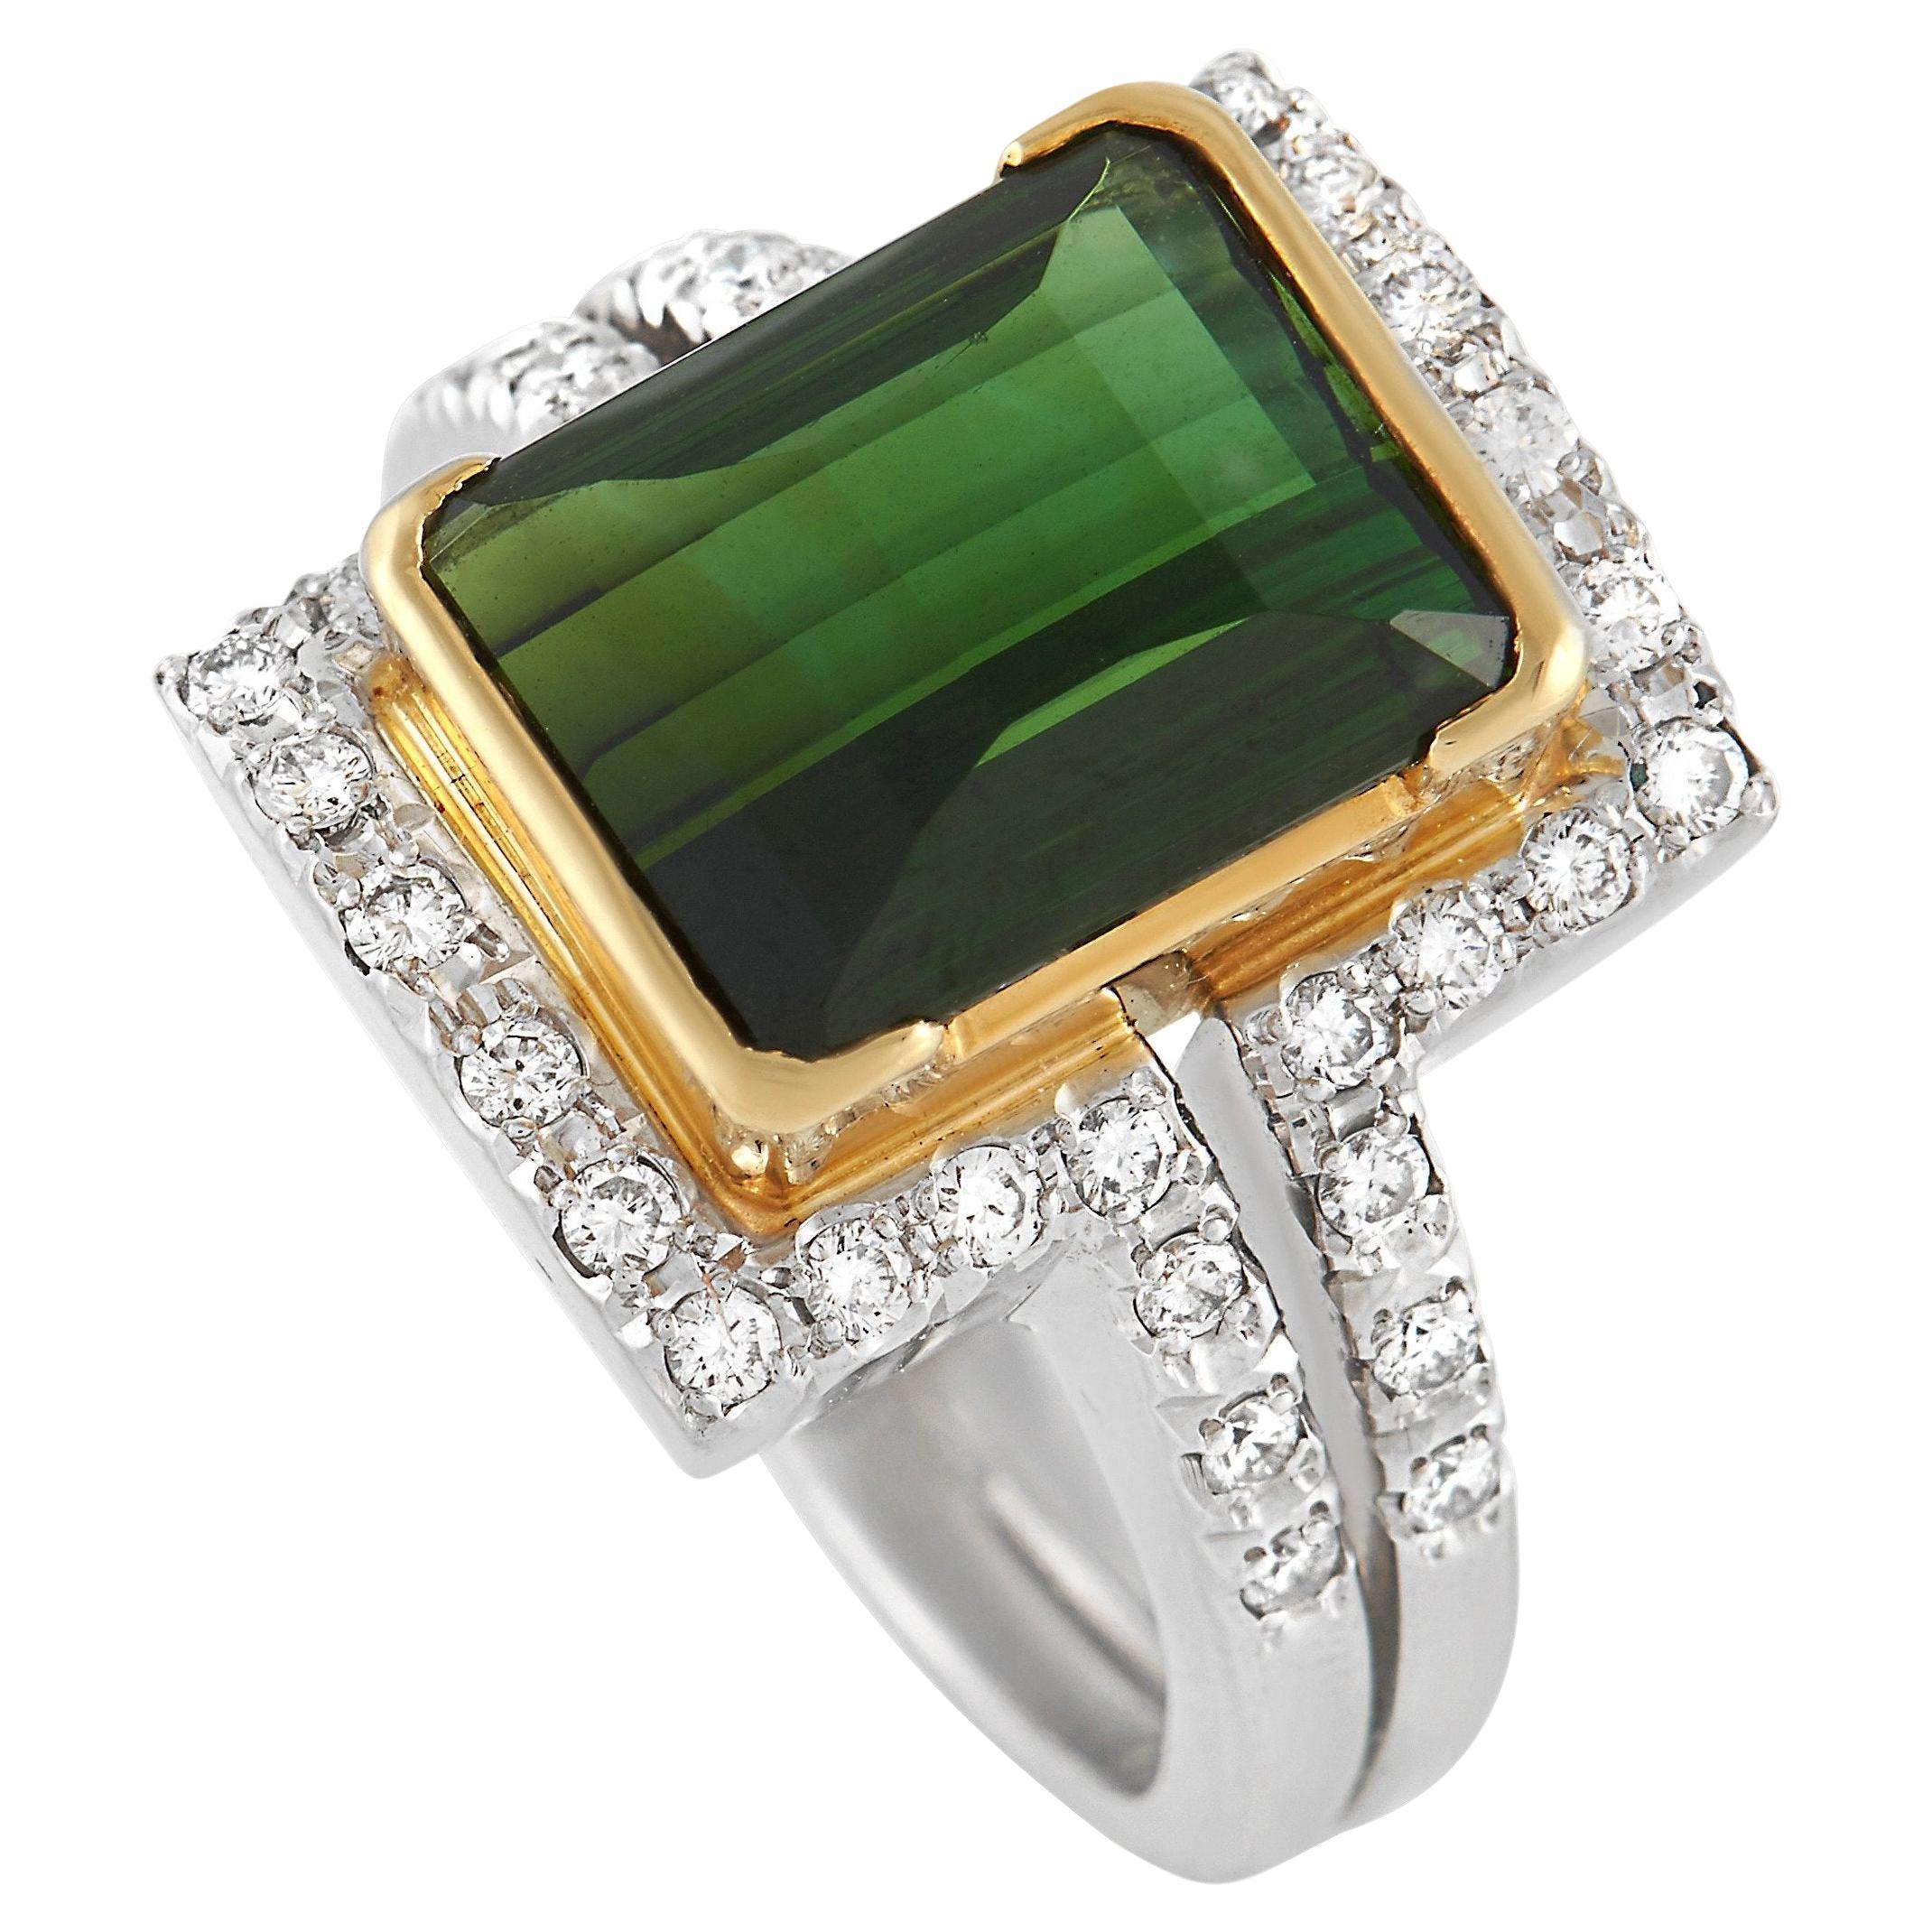 LB Exclusive Platinum and 18K Yellow Gold 0.45 Ct Diamond and 7.18 Ct Tourmaline